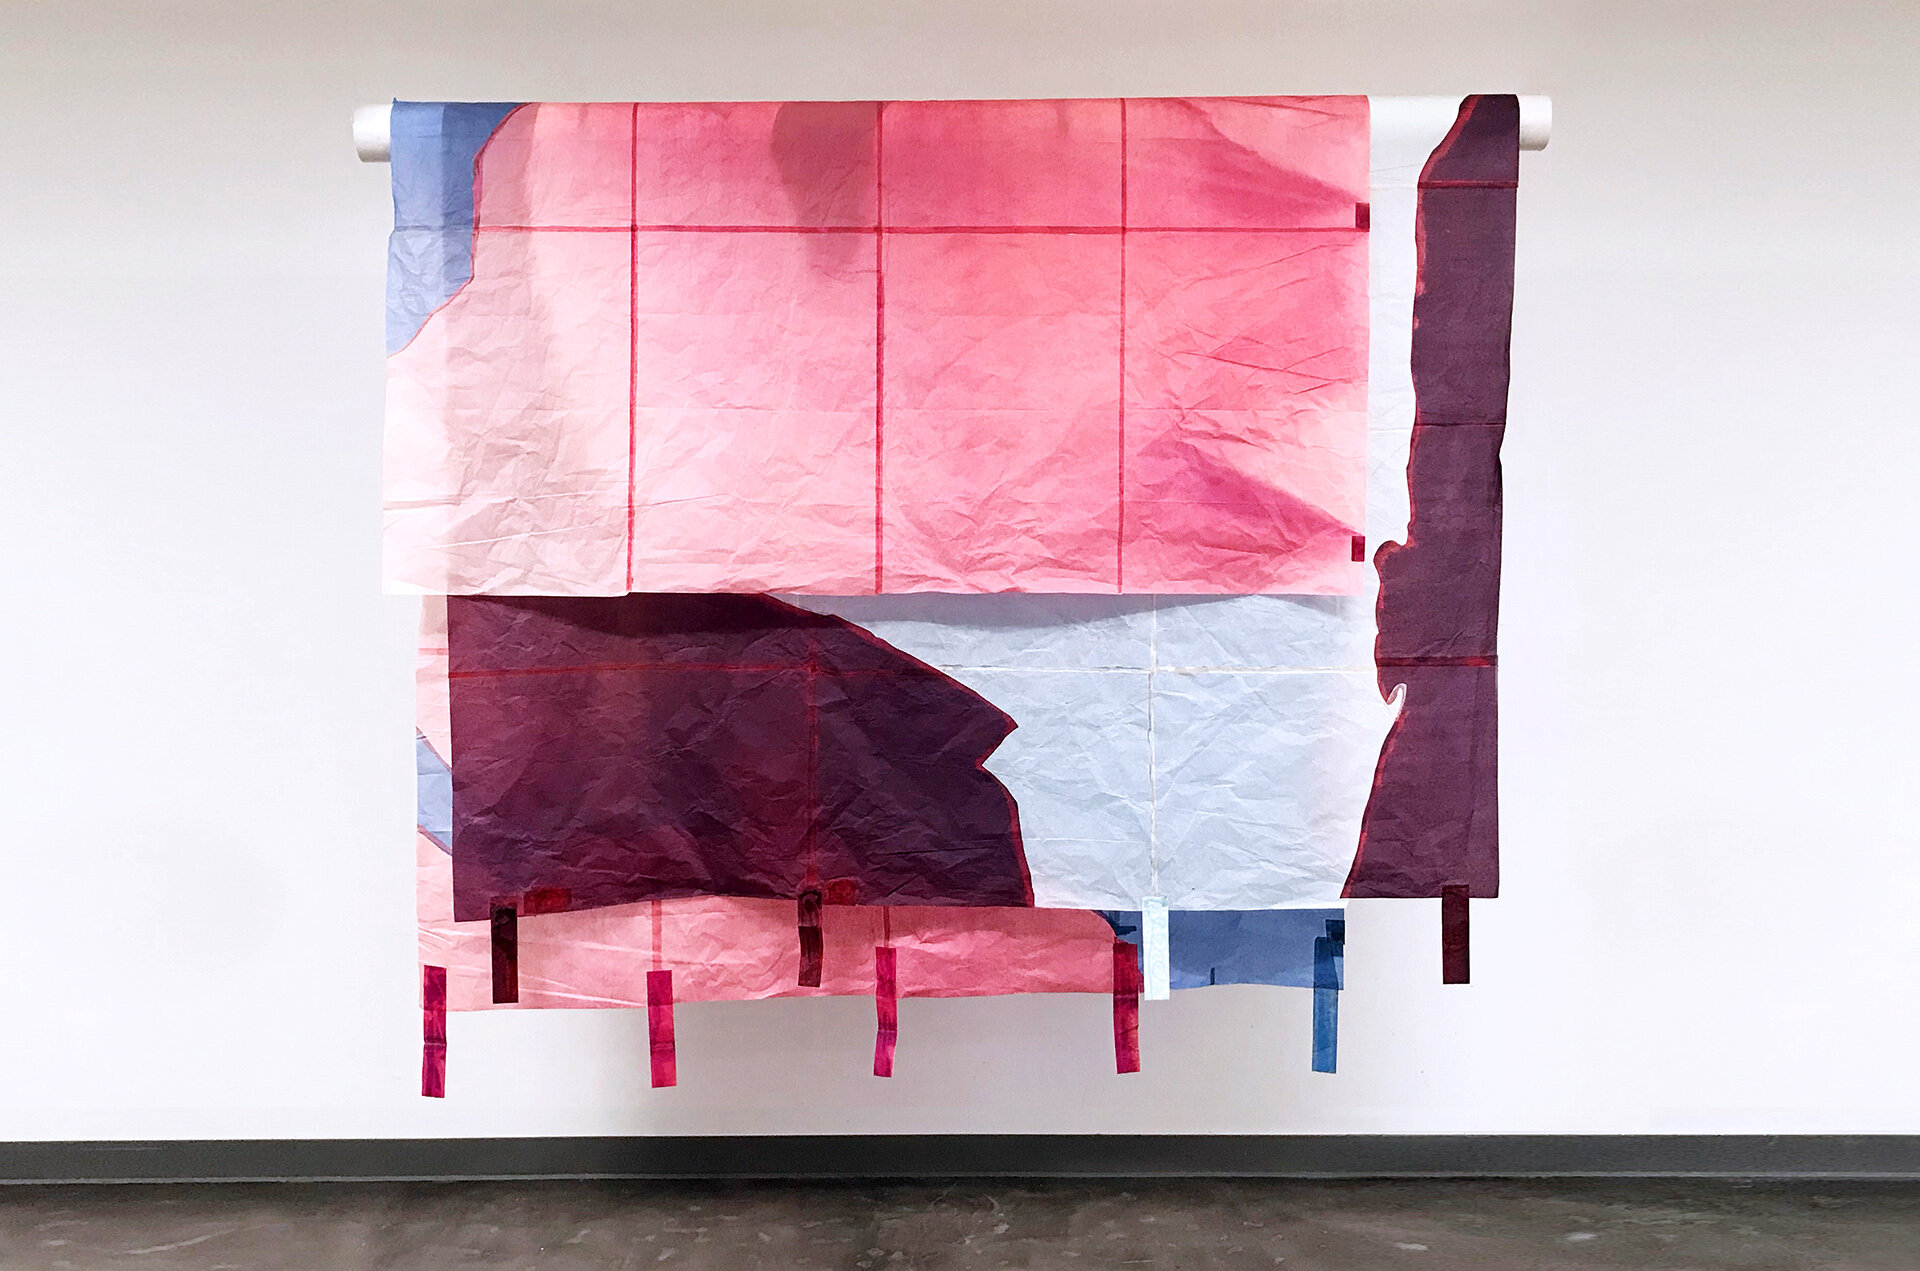  Valentina Jager:  Noon drags its starving shadow to the grid , tissue paper, 200x250cm, 2021 